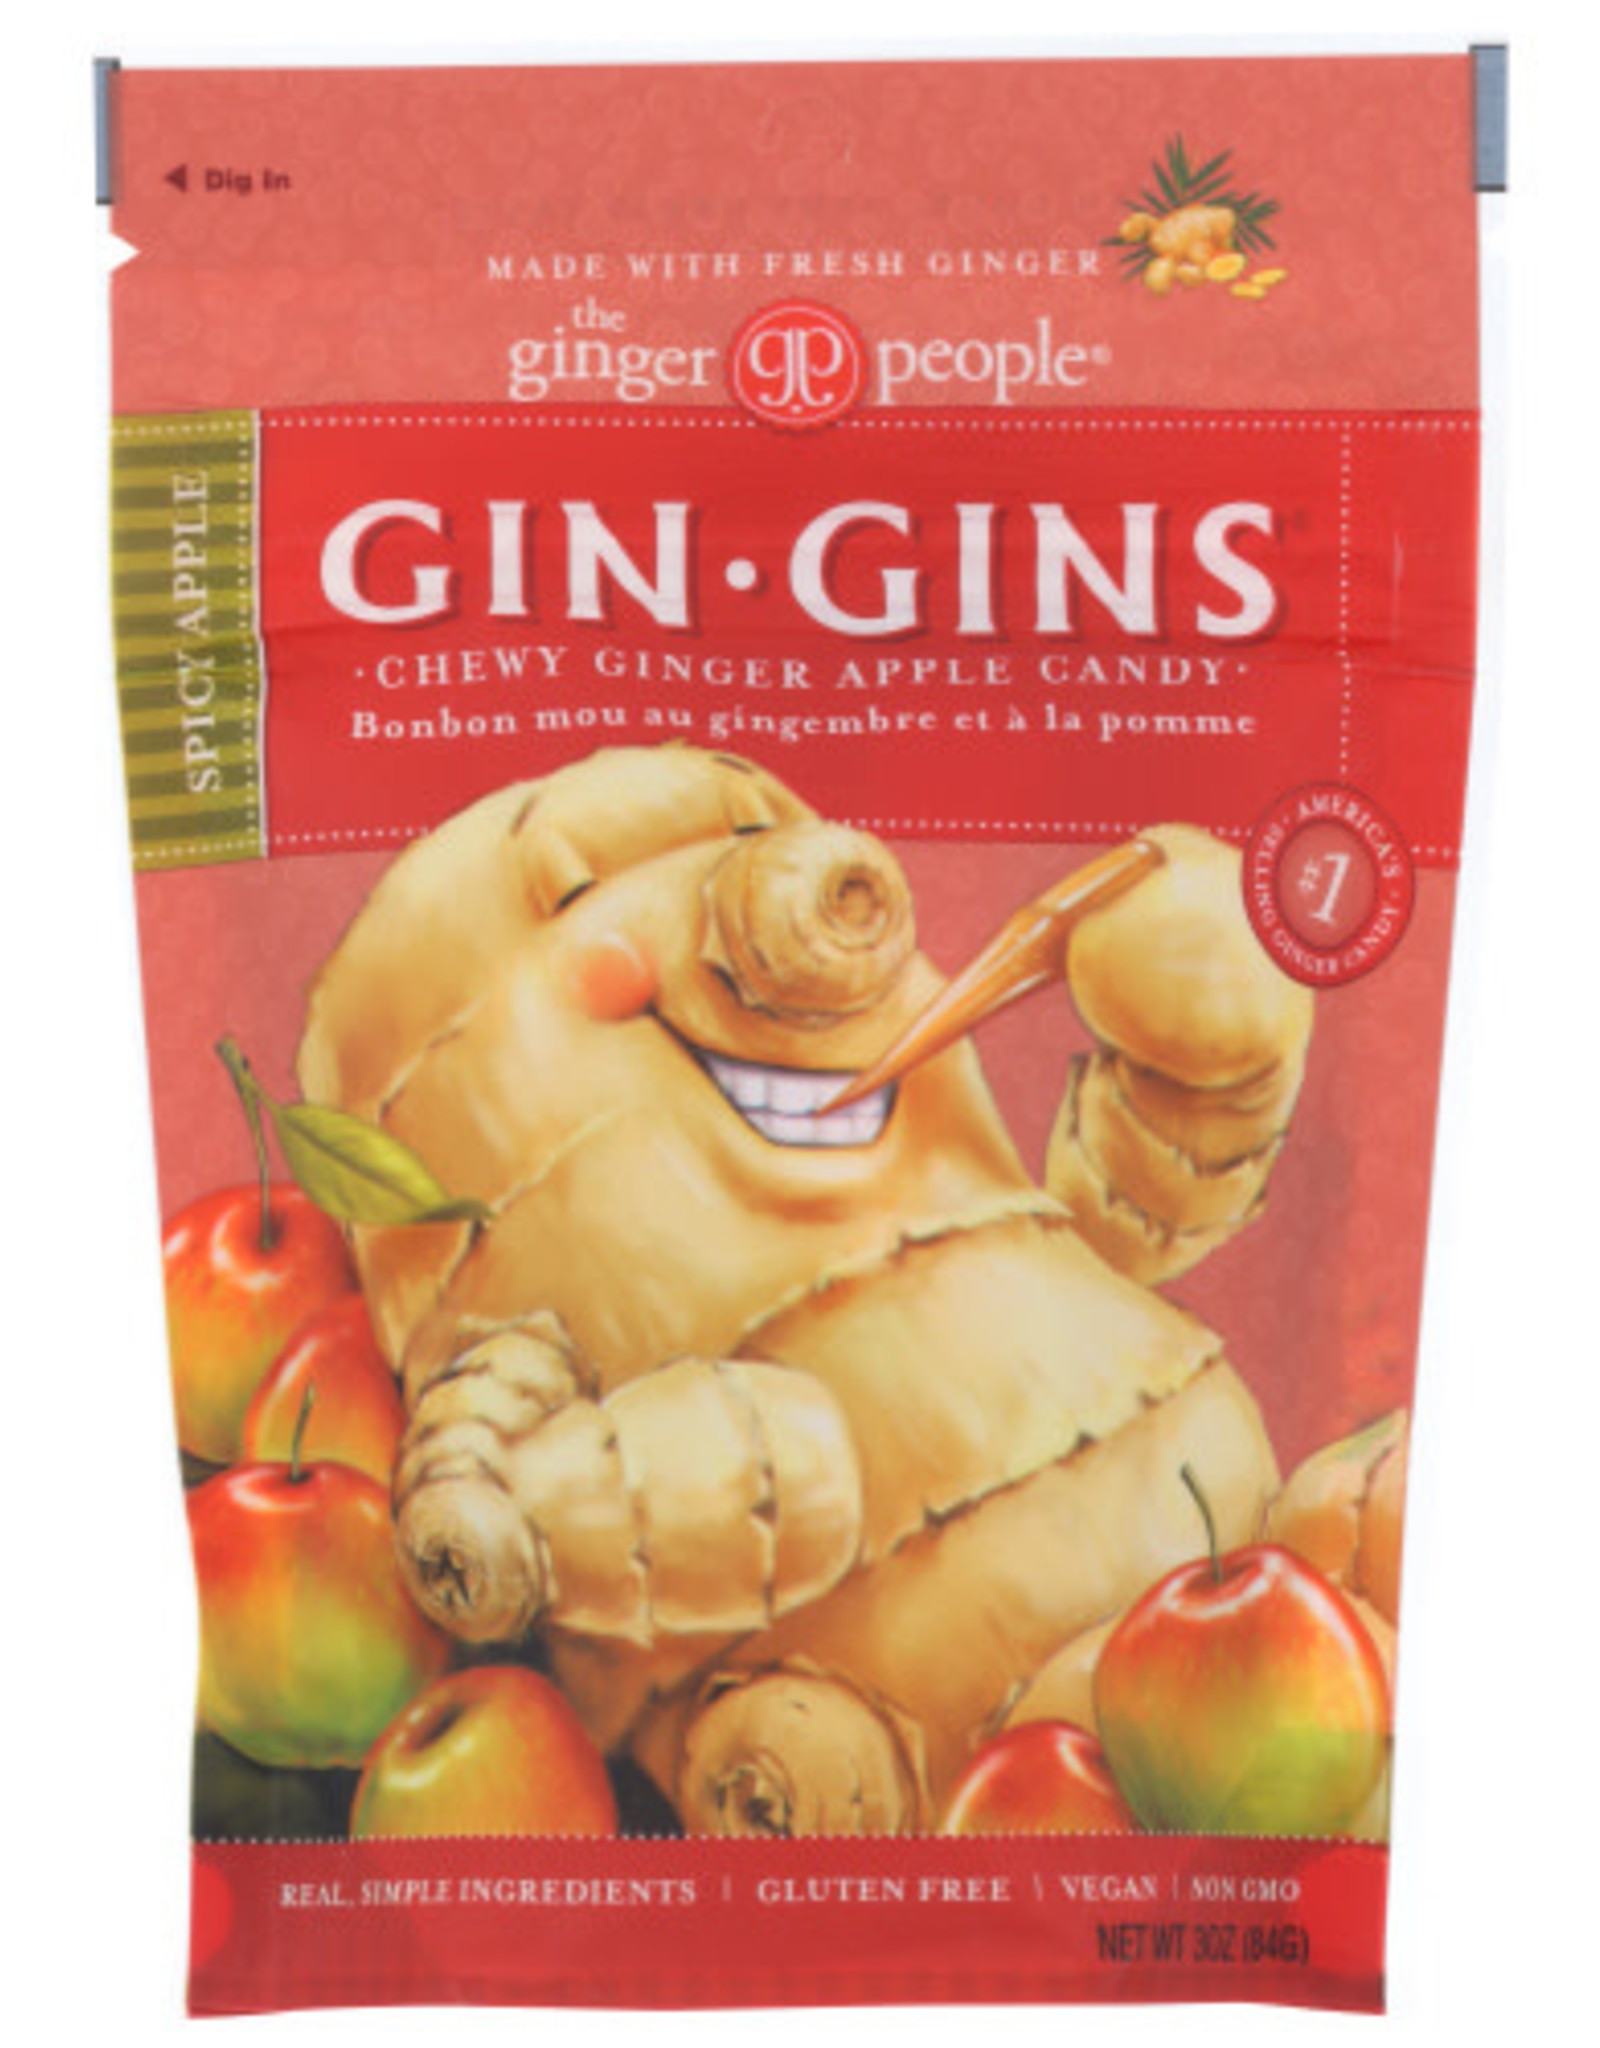 THE GINGER PEOPLE® THE GINGER PEOPLE GIN GINS SPICY APPLE CHEWY GINGER CANDY, 3 OZ.